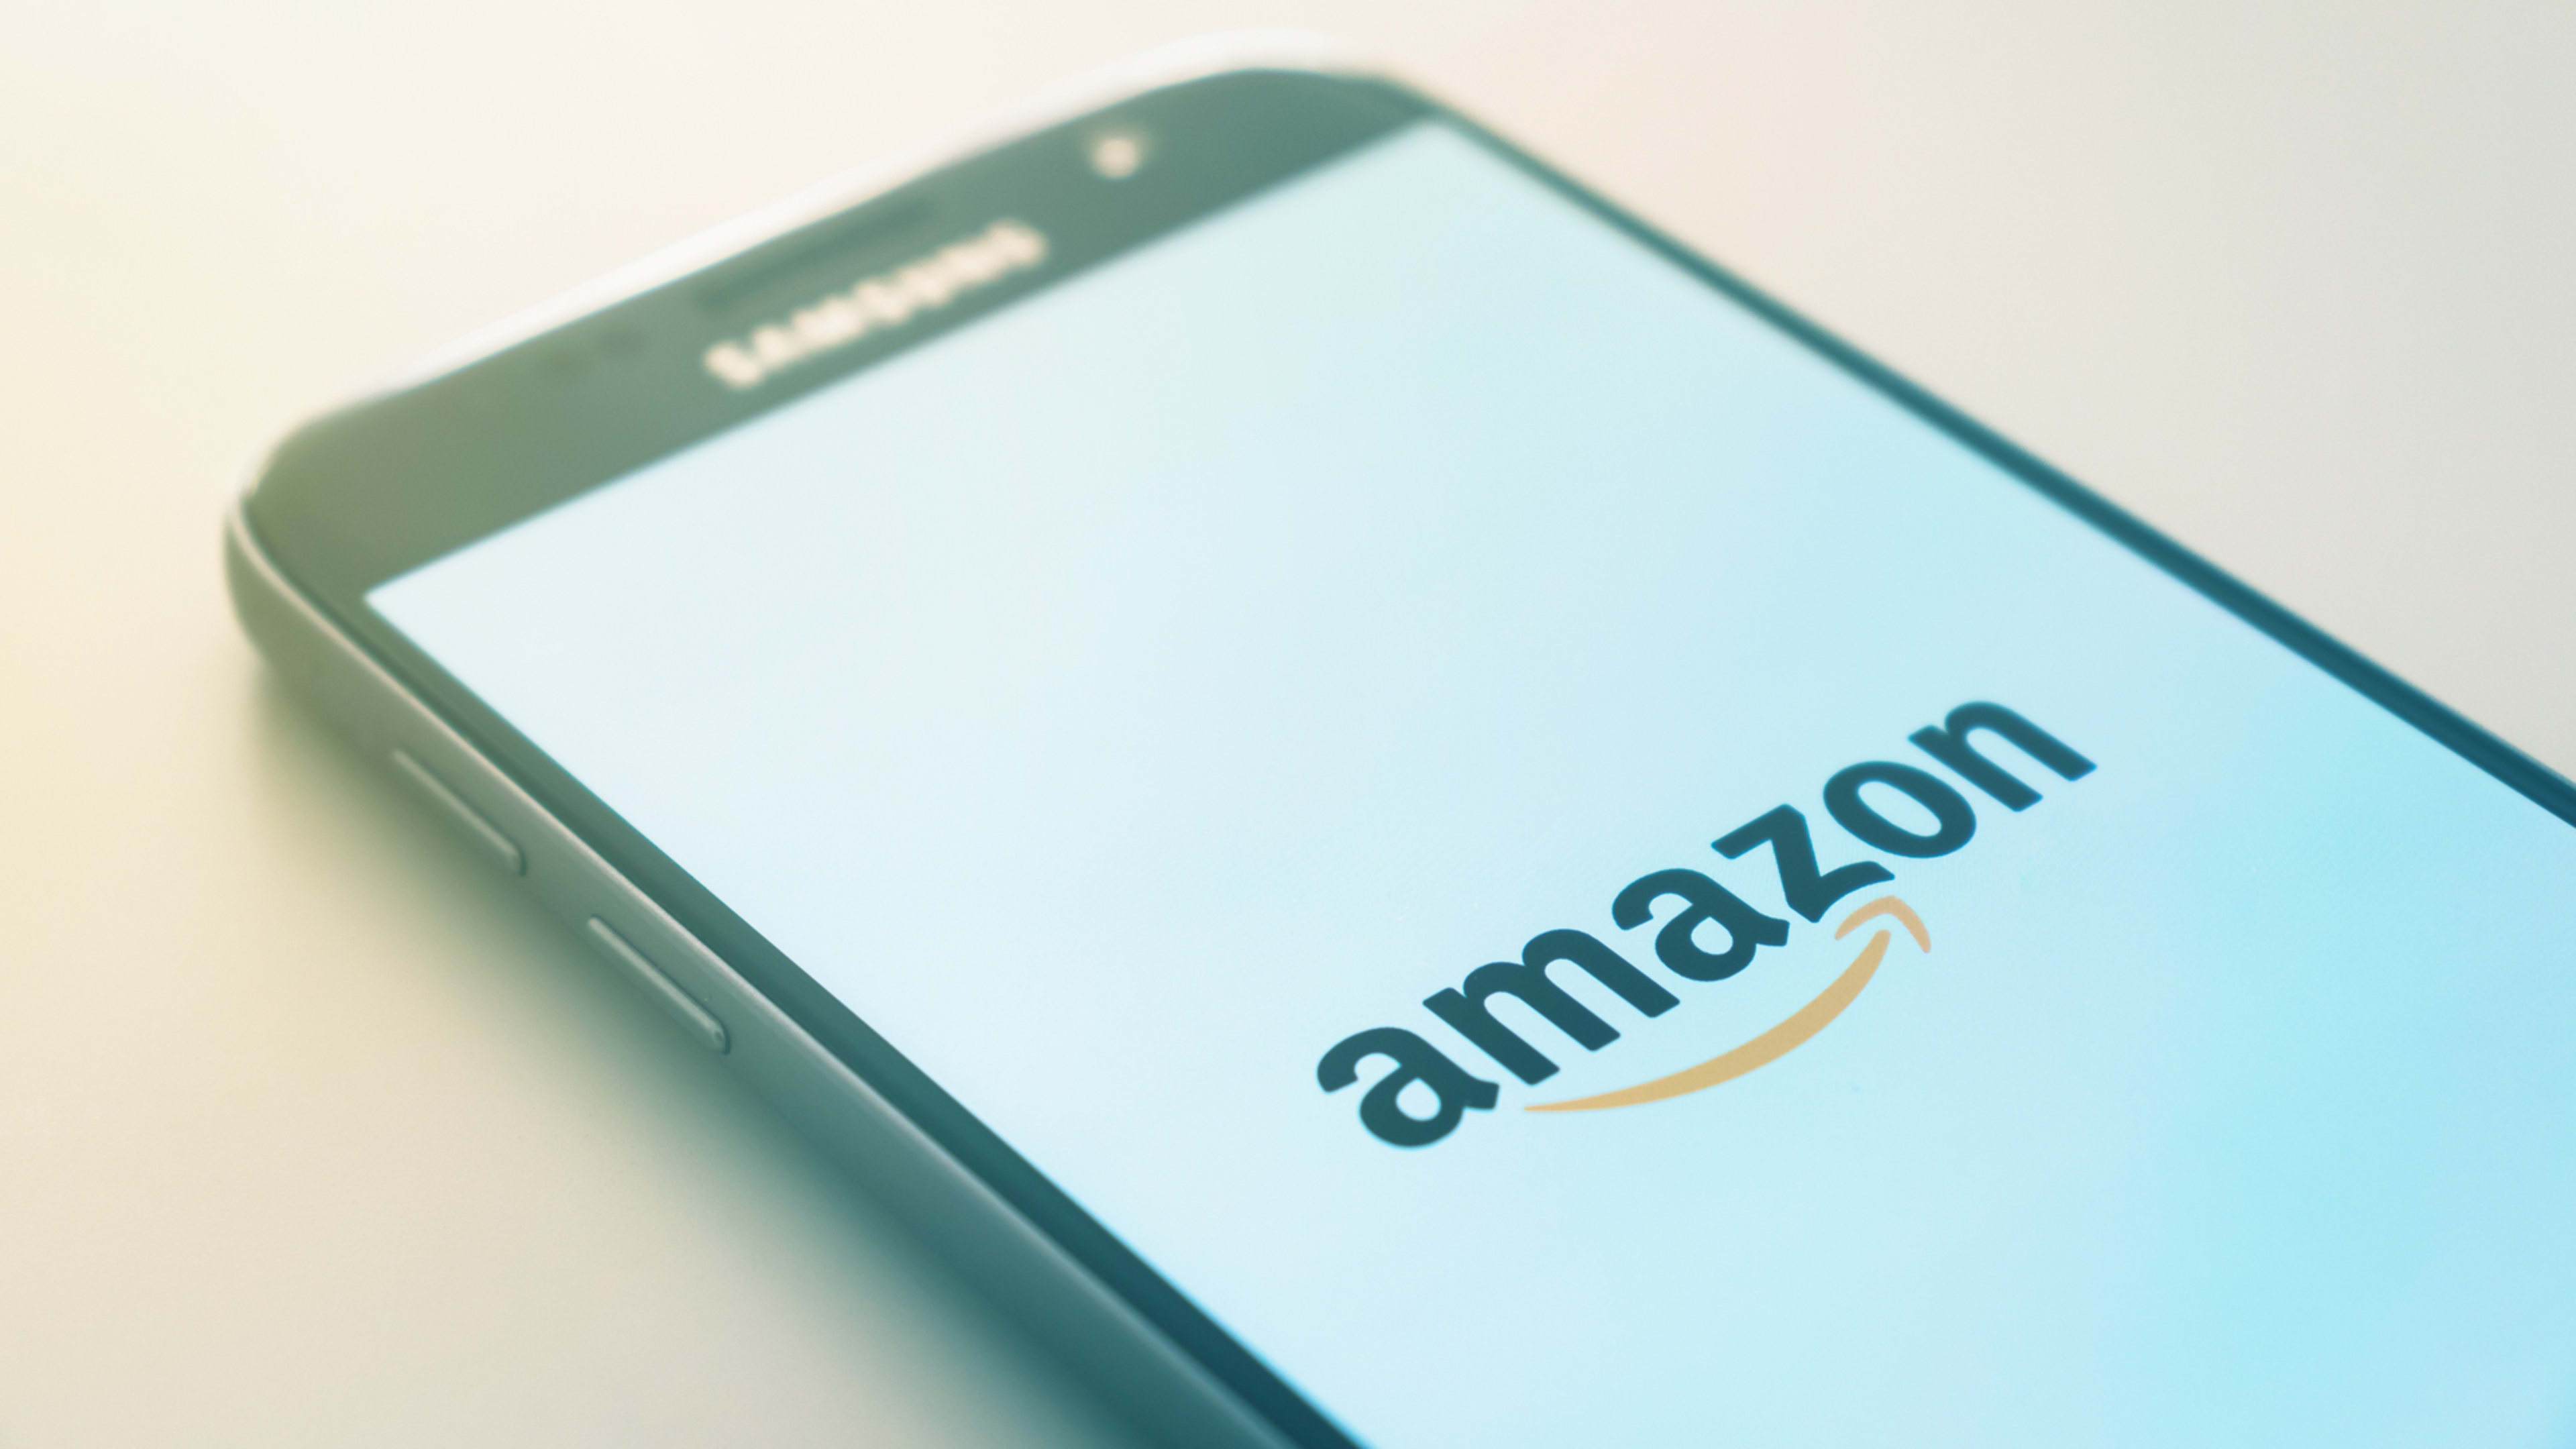 Amazon is now the third largest digital ad platform in the U.S.